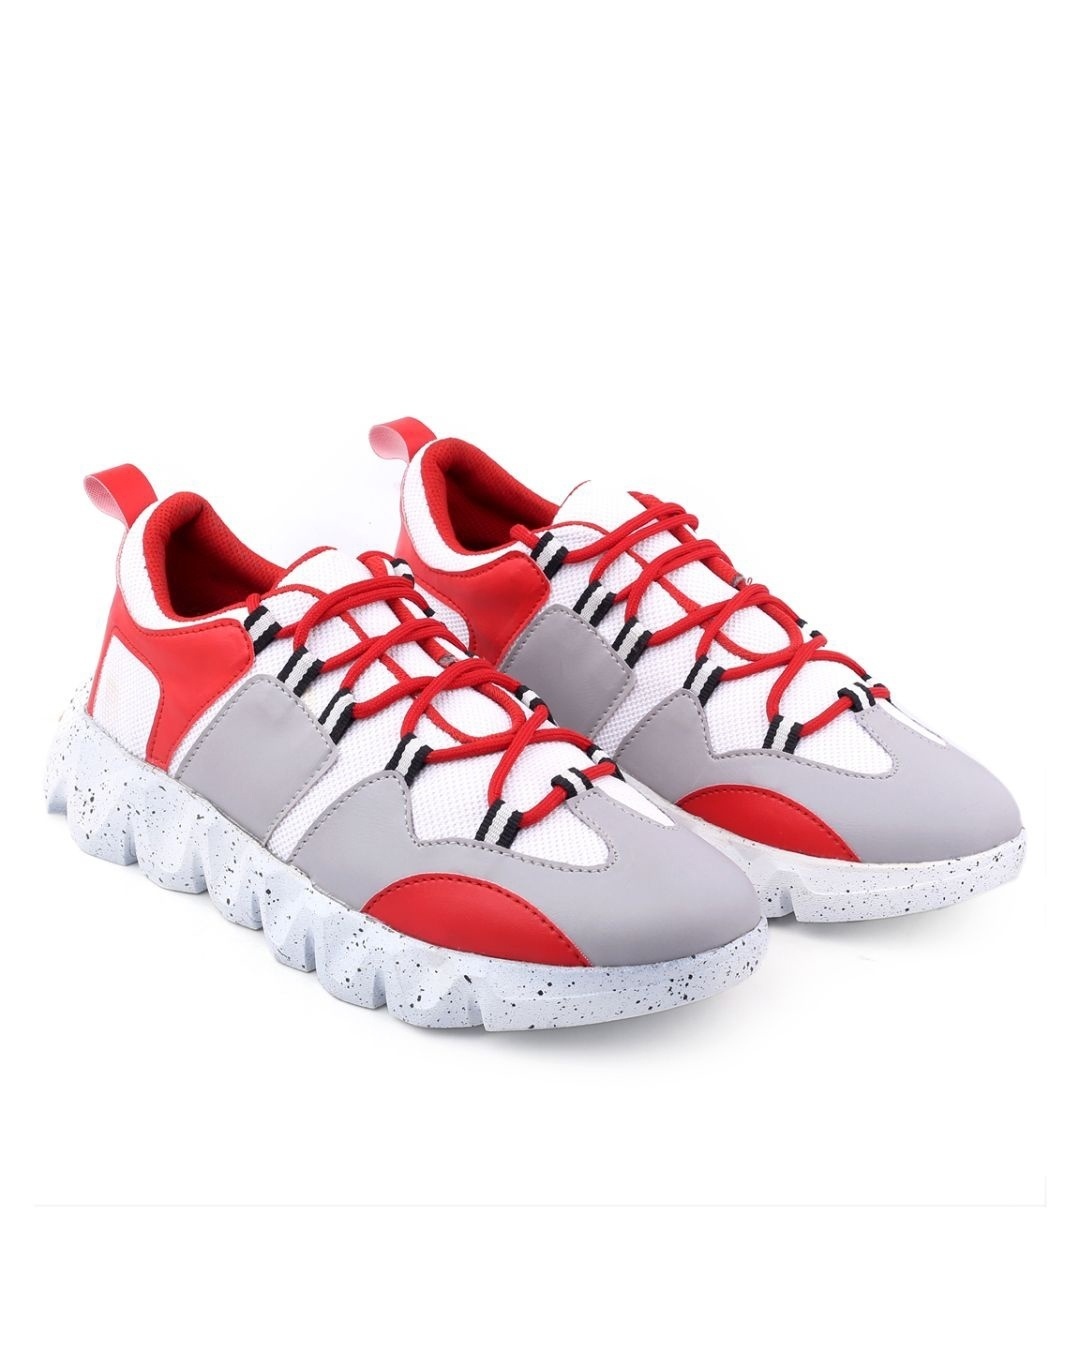 Shop Men's Red & Grey Color Block Lace Up Sneakers